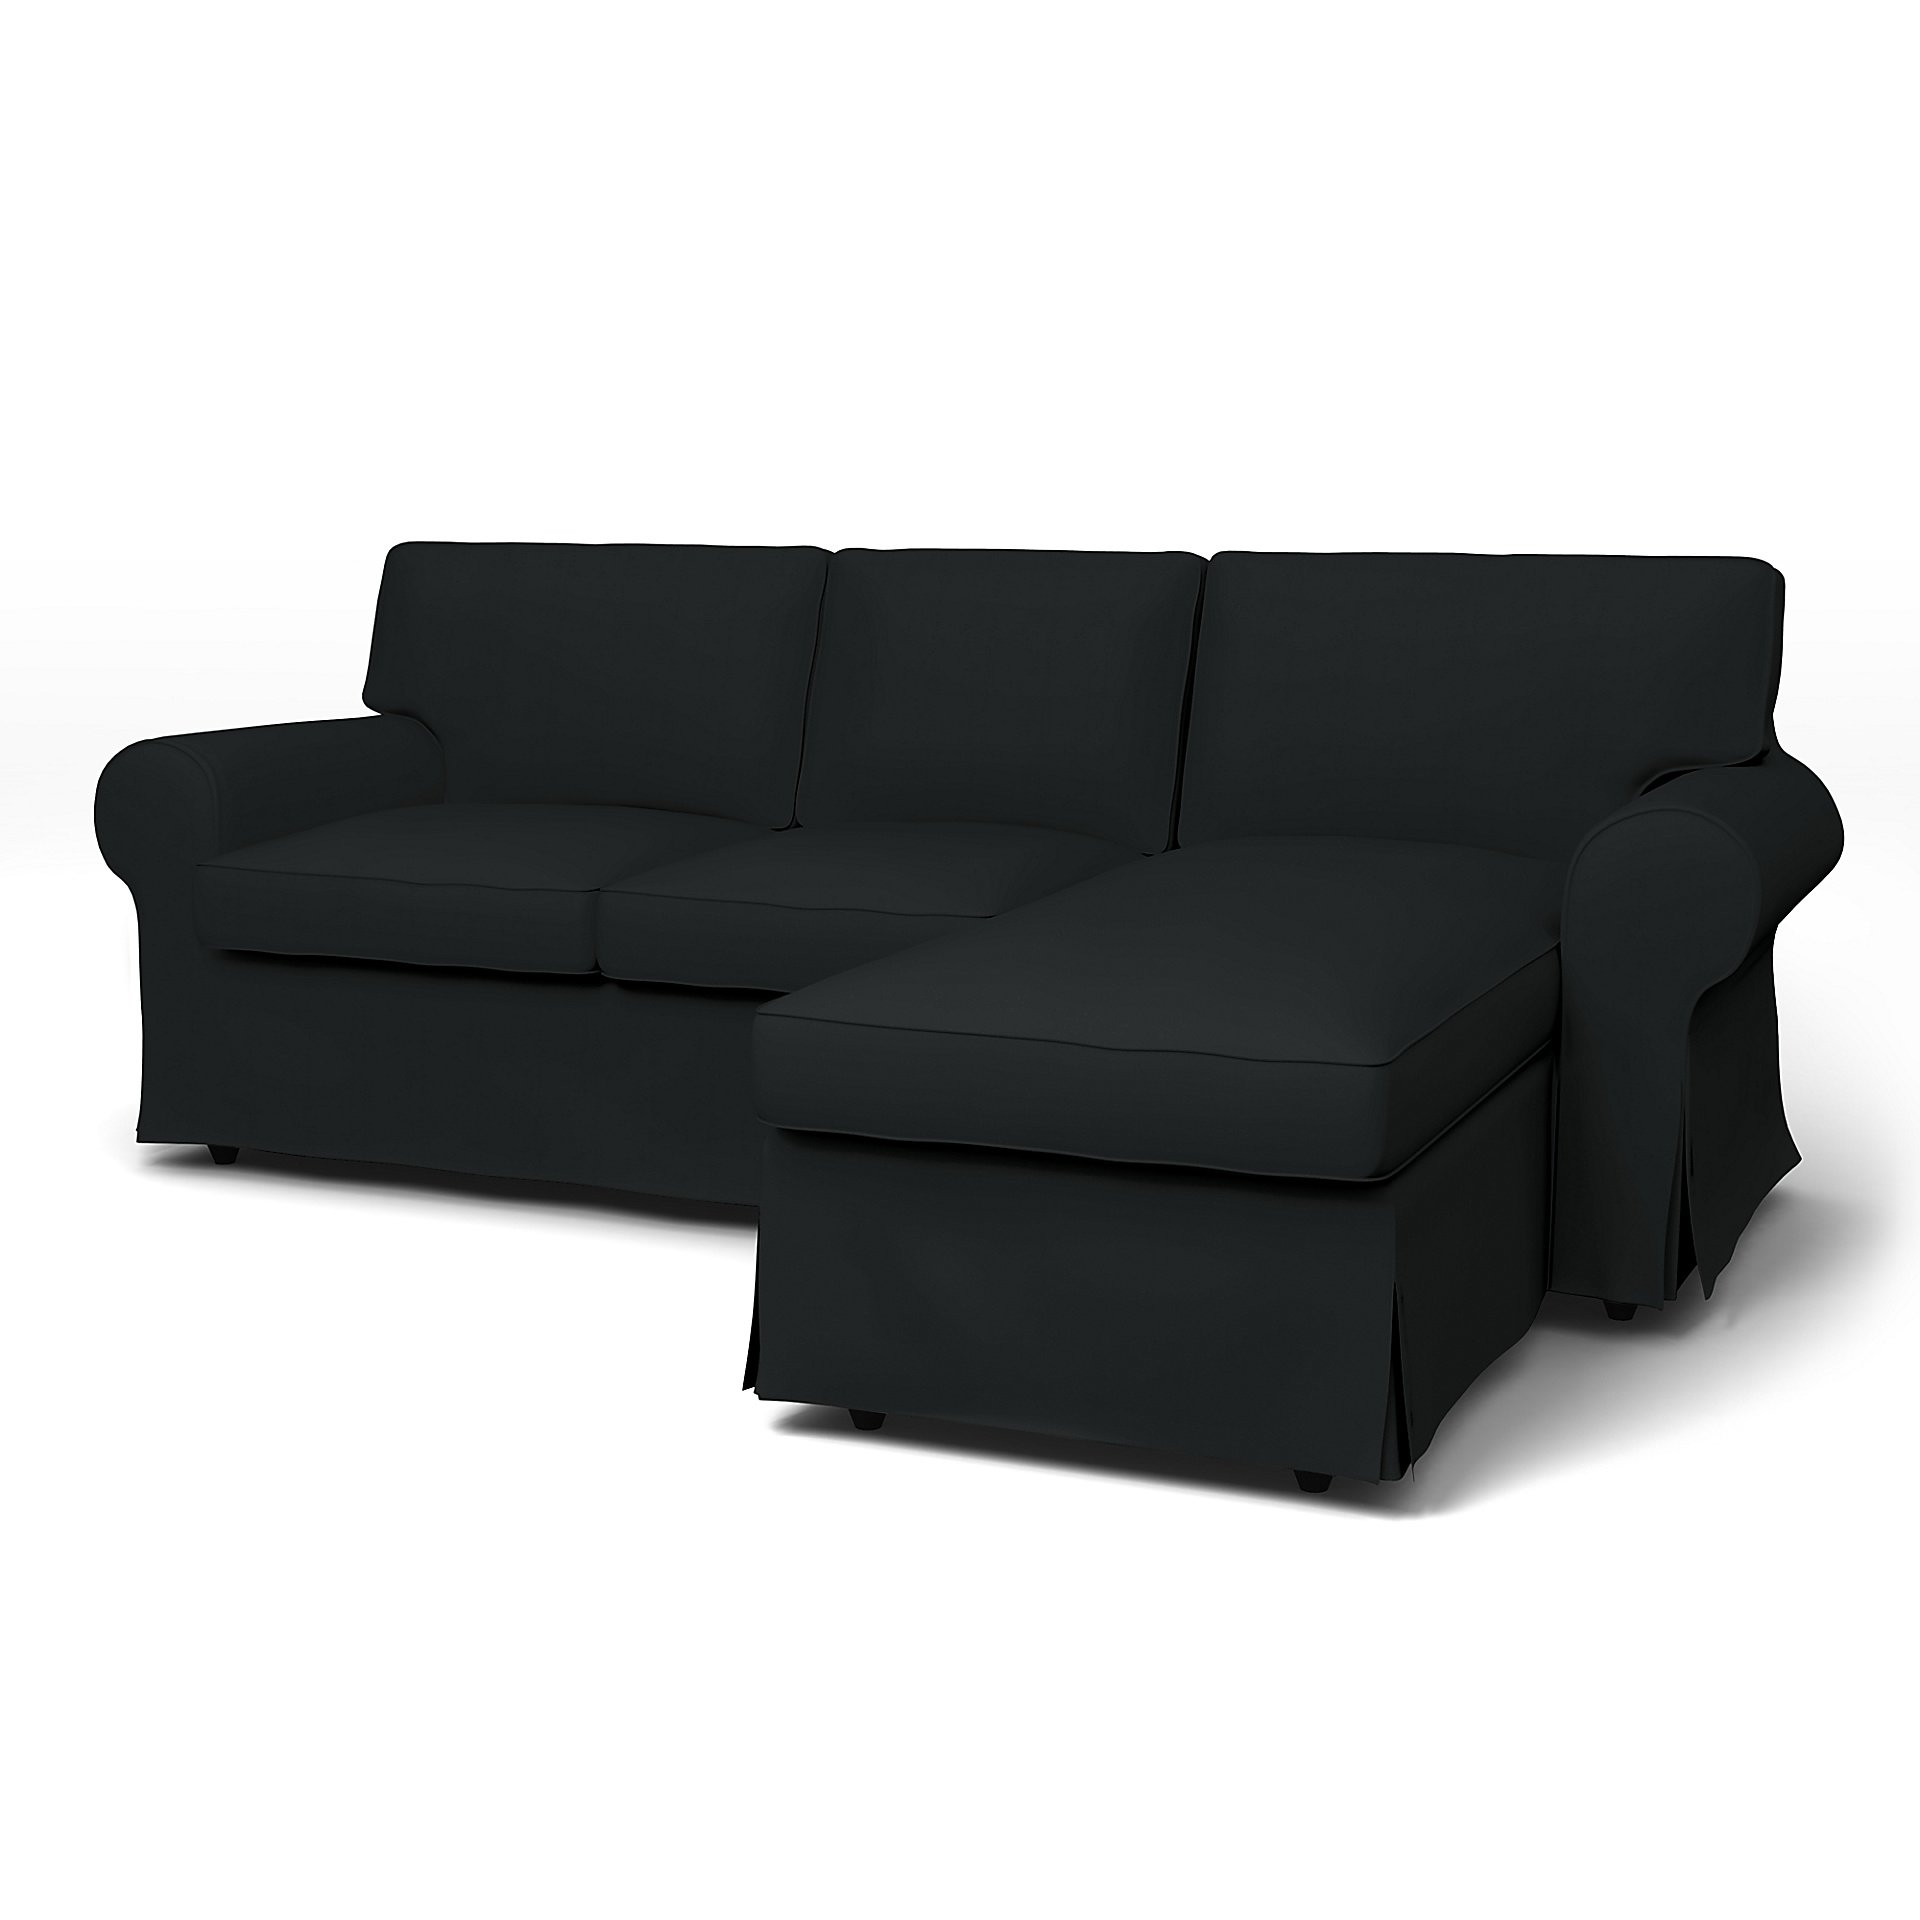 IKEA - Ektorp 3 Seater Sofa with Chaise Cover, Jet Black, Cotton - Bemz